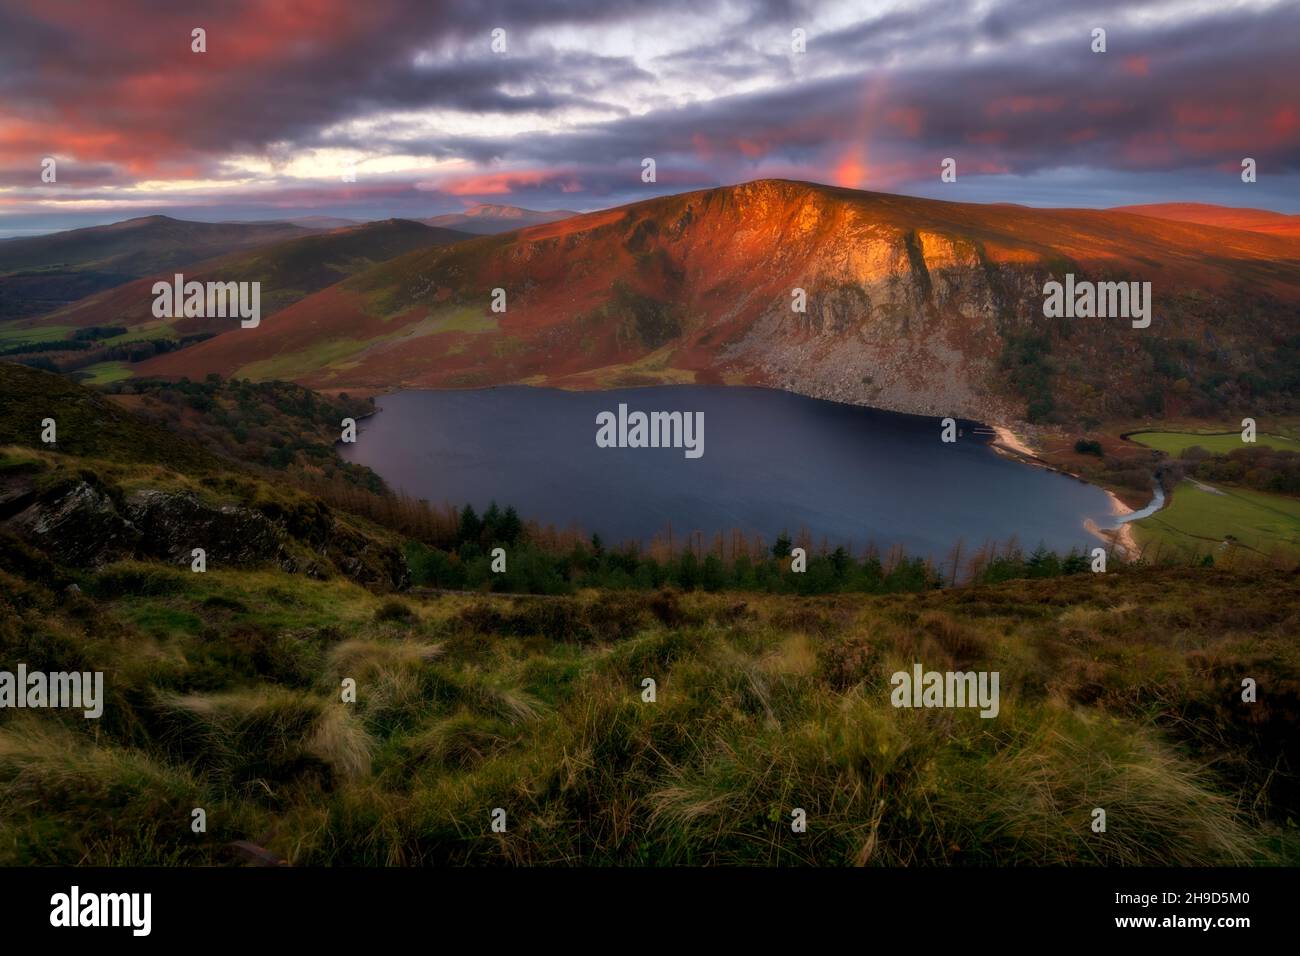 Ireland landscape - Wicklow Mountains - Lough Tay Stock Photo